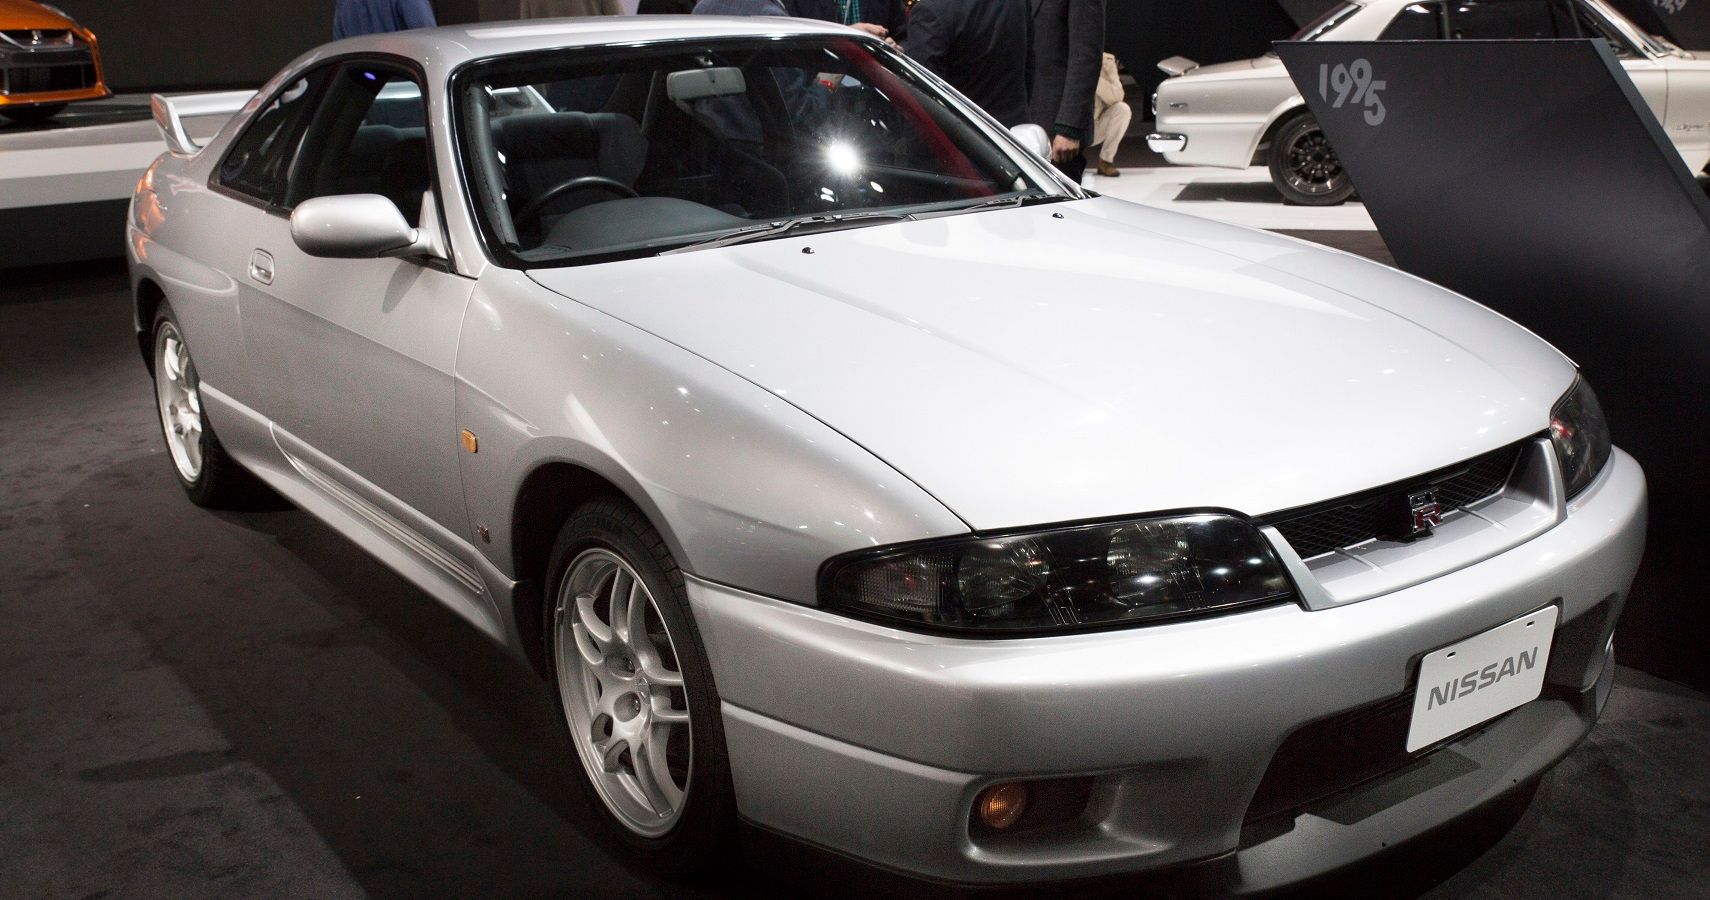 White Nissan Skyline, front and passenger side view